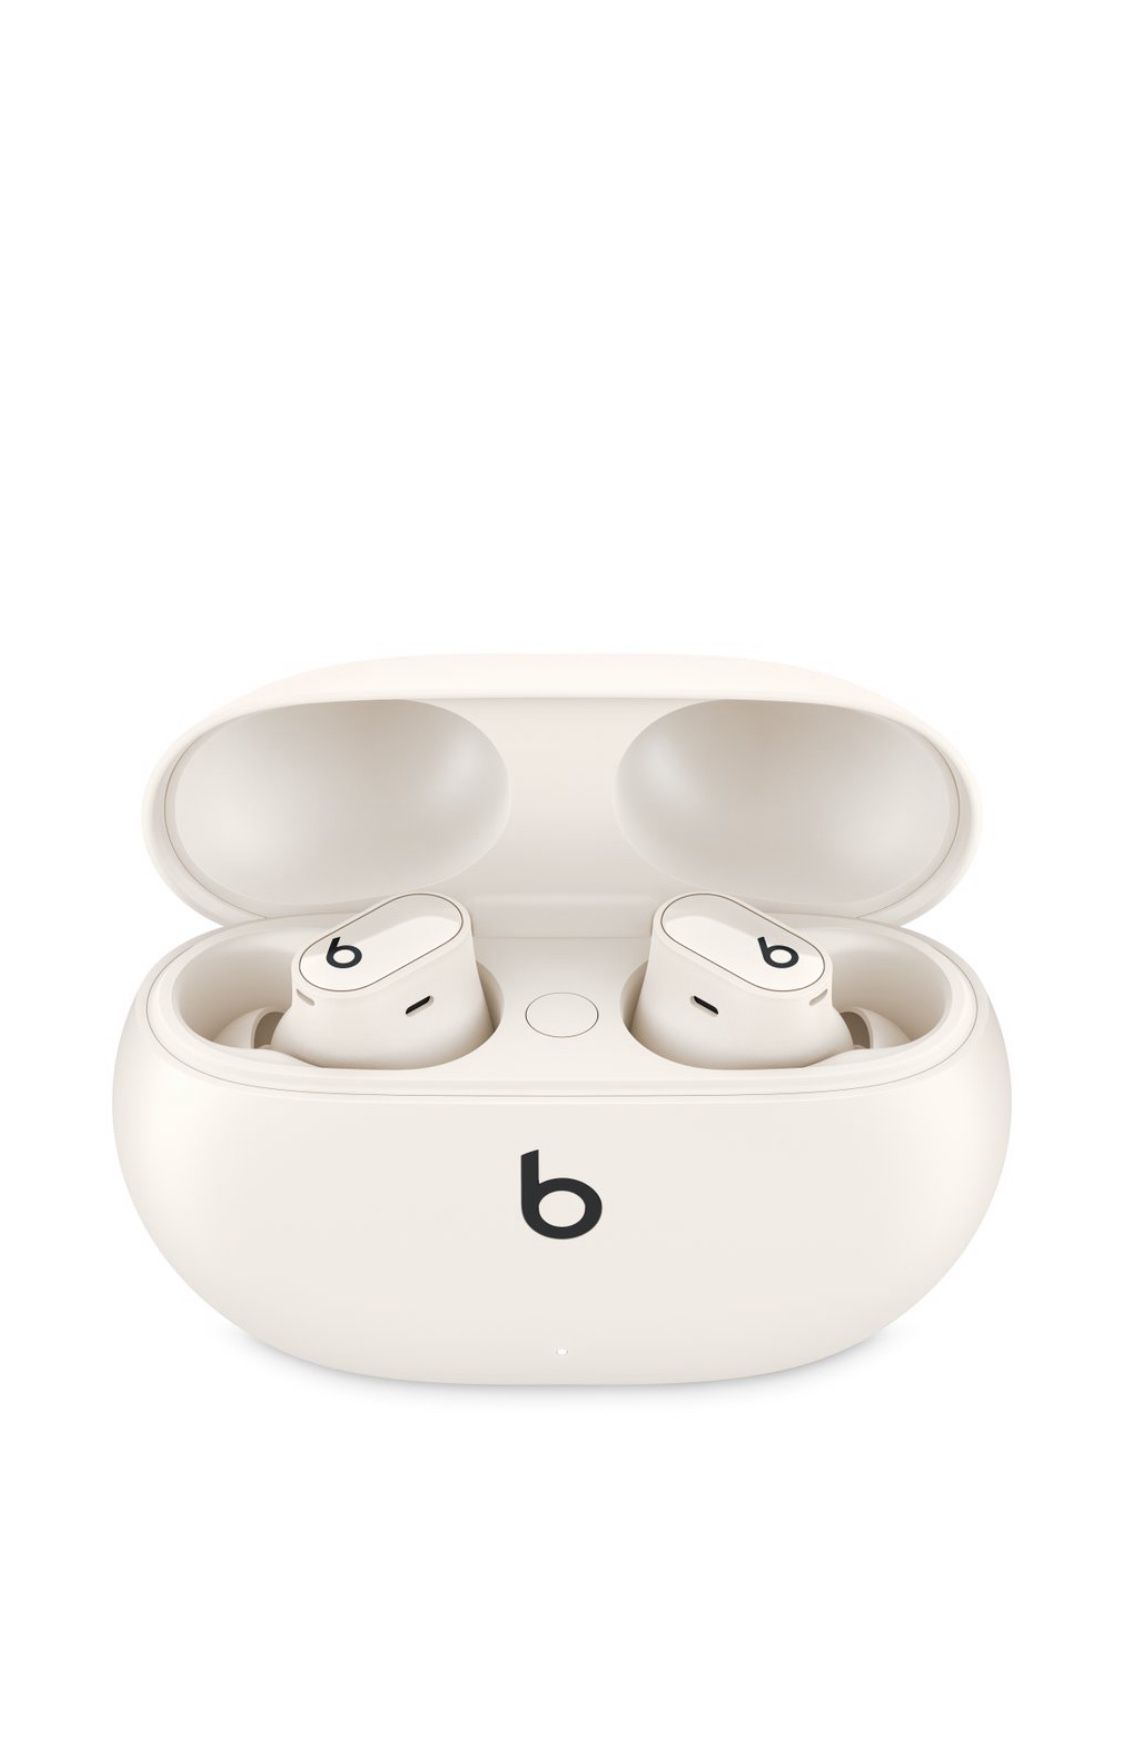 Beats Solo Buds Plus $60 Beats Solo Buds $50